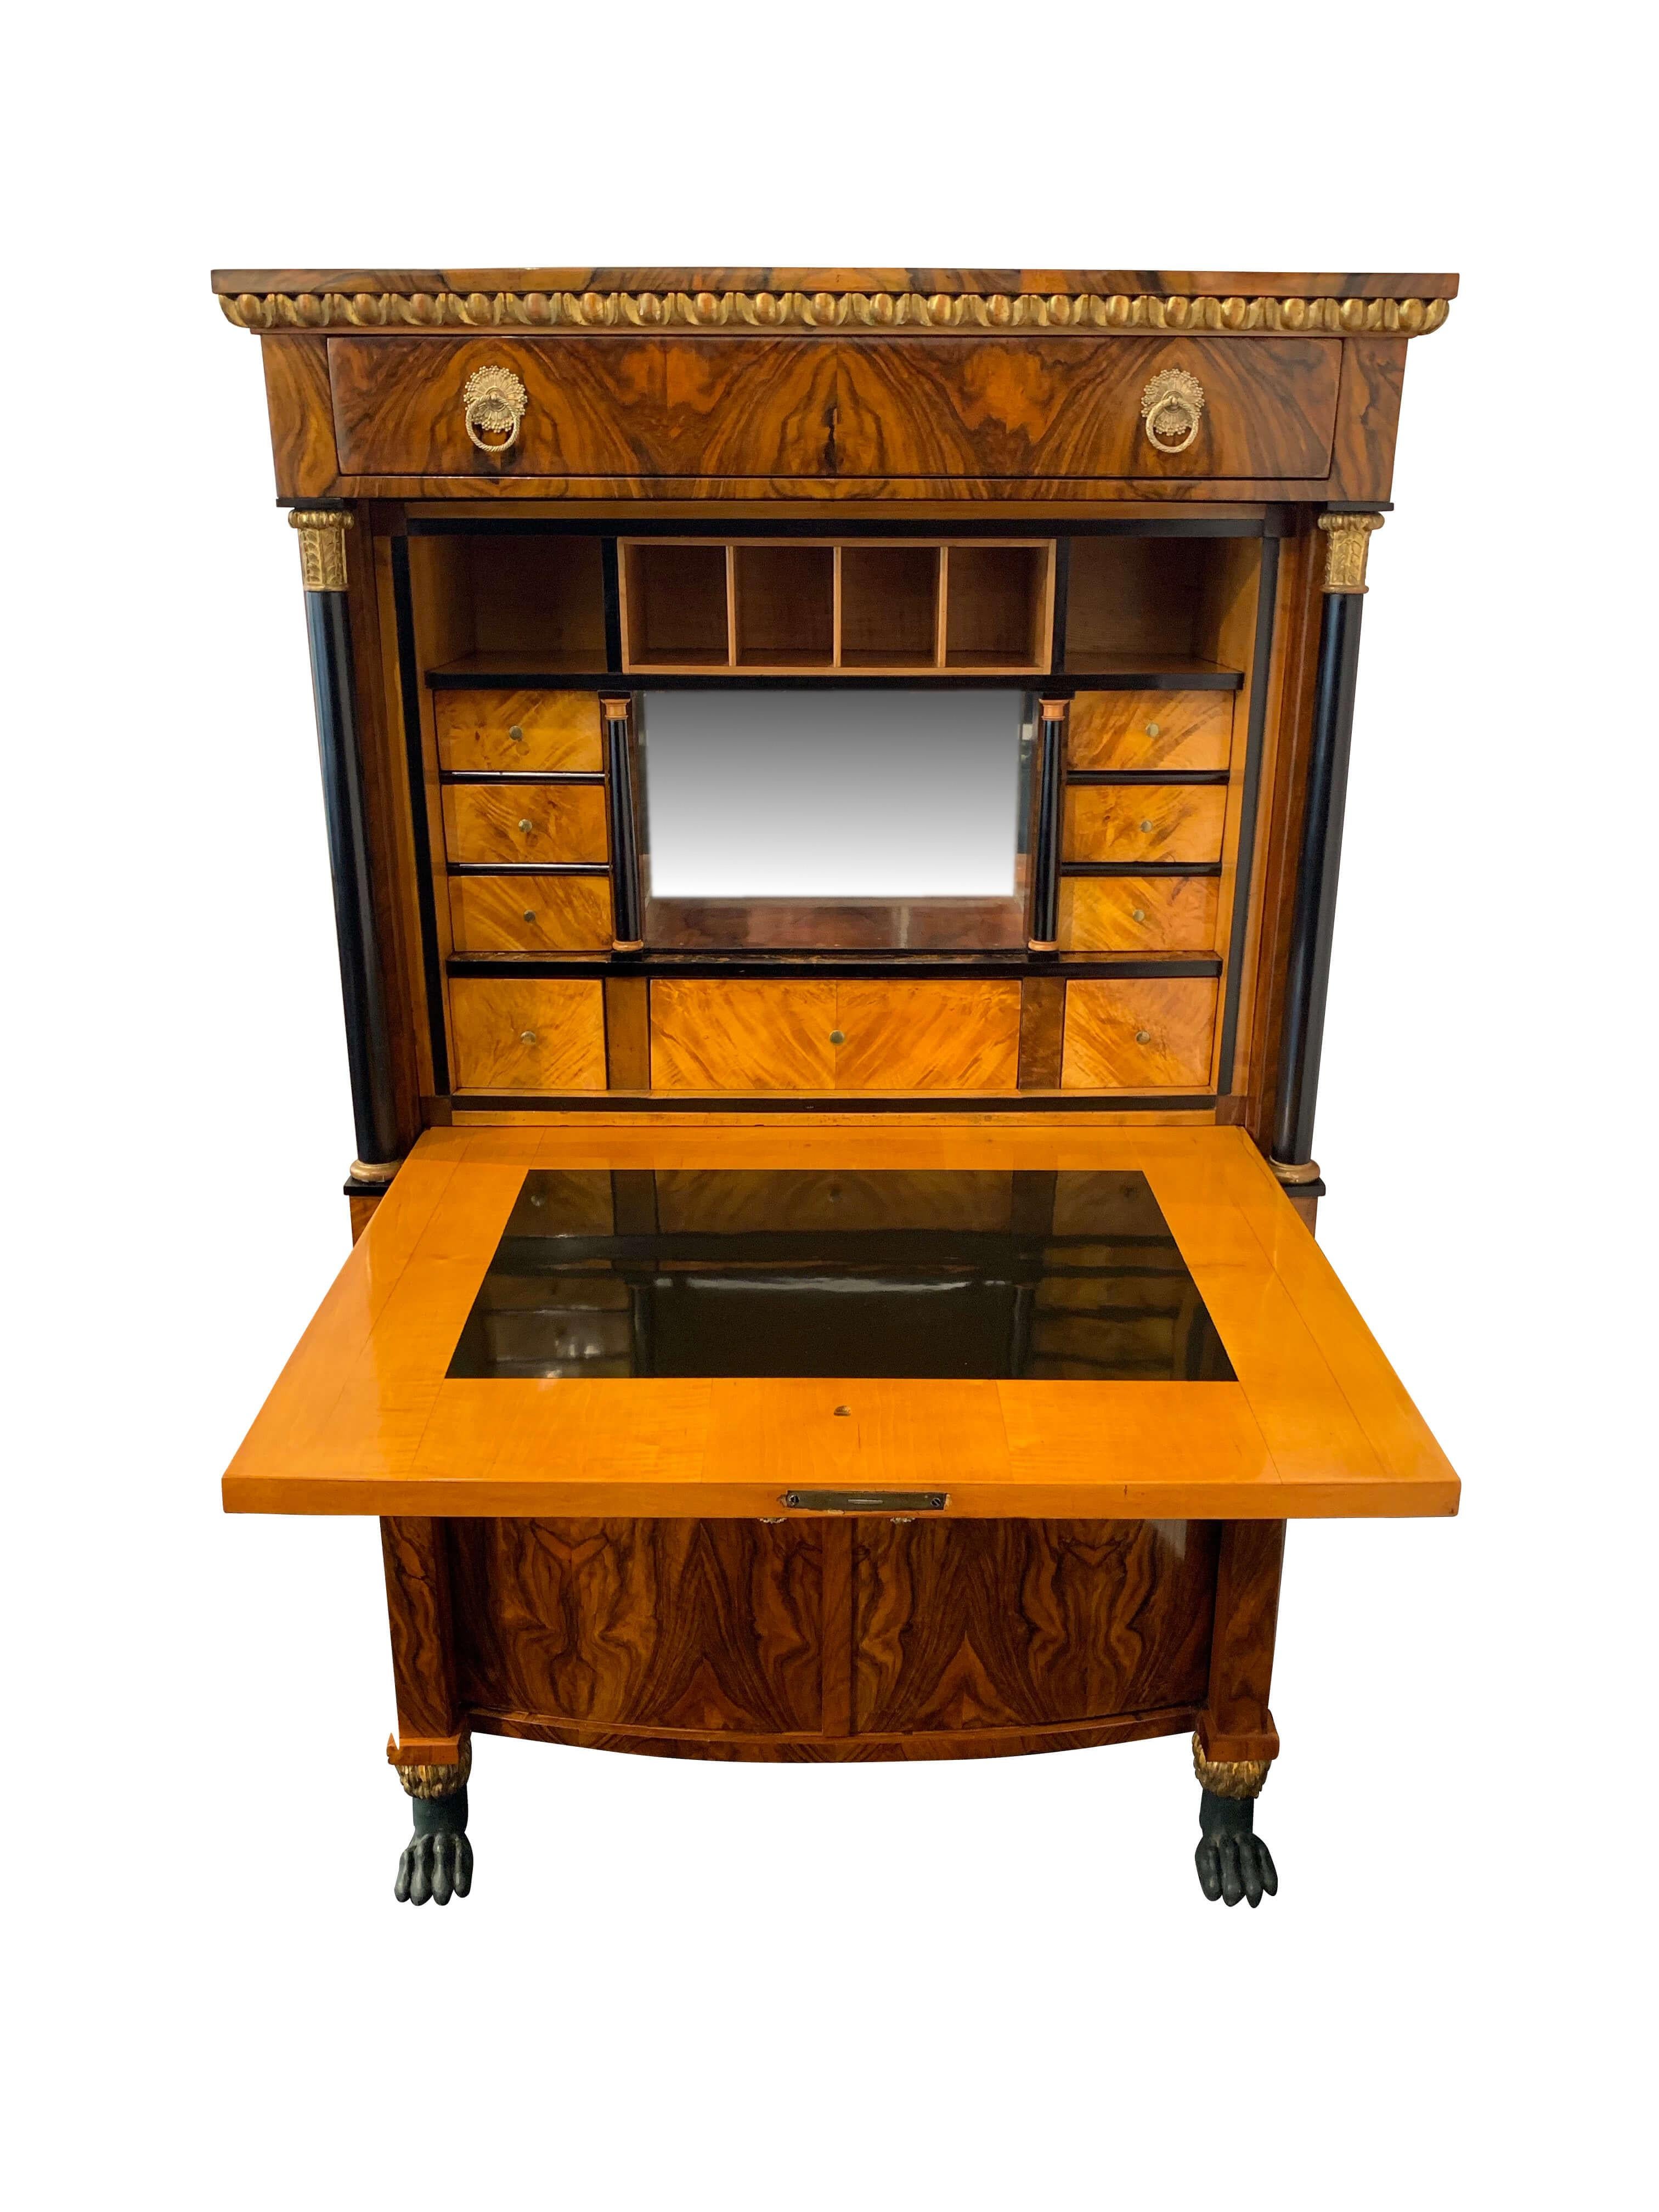 Very fine neoclassical Empire Secrétaire / Secretary / Escritoire / writing armoire from Vienna, Austria (then called Danube Monarchy), circa 1810.

Finely chosen, bookmatched walnut veneer running through overhead drawer and plate. French polished